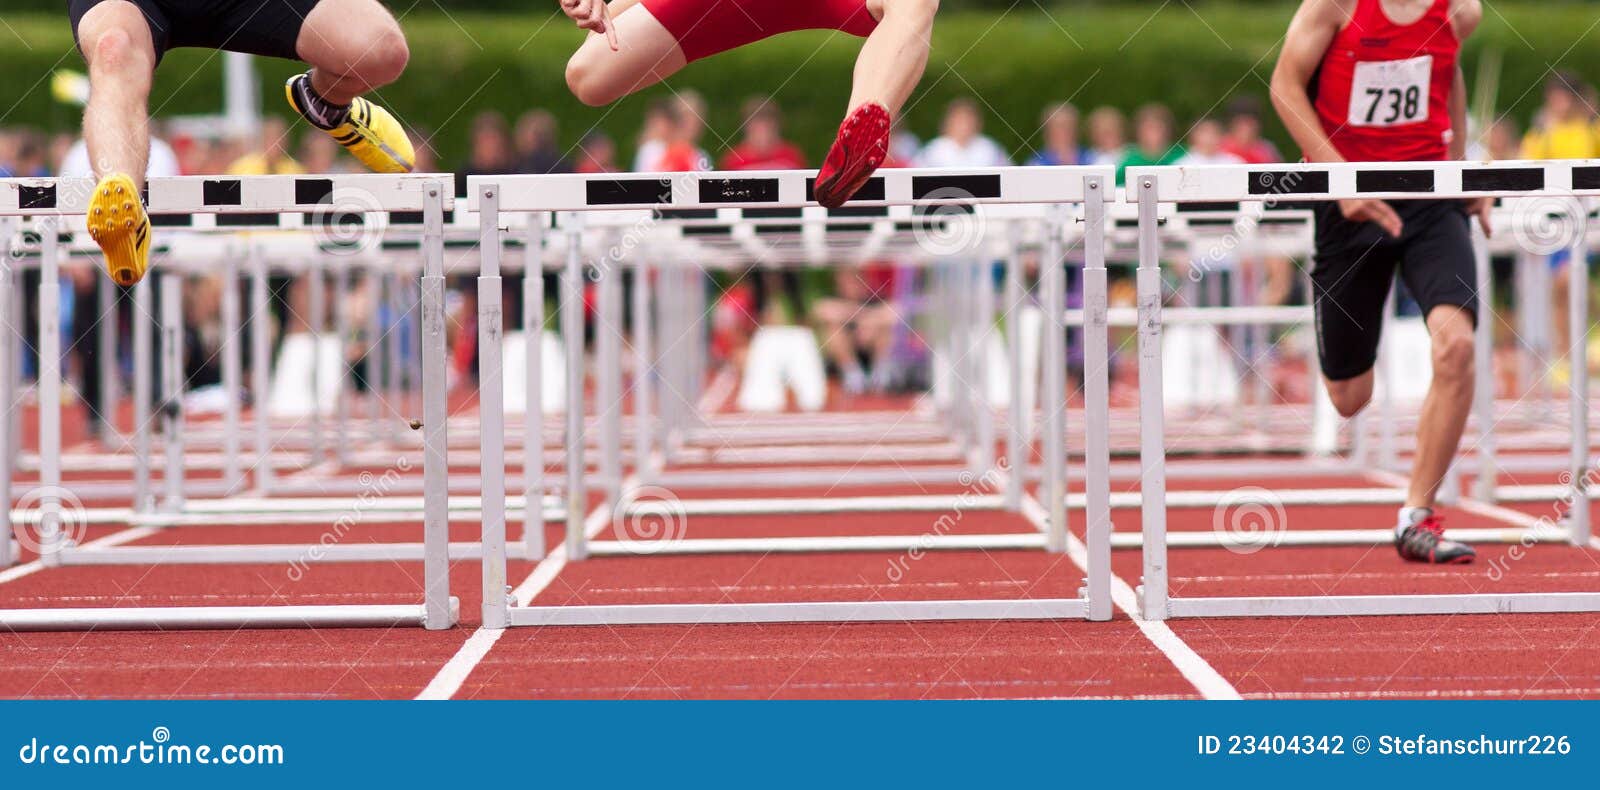 hurdles sprint in track and field